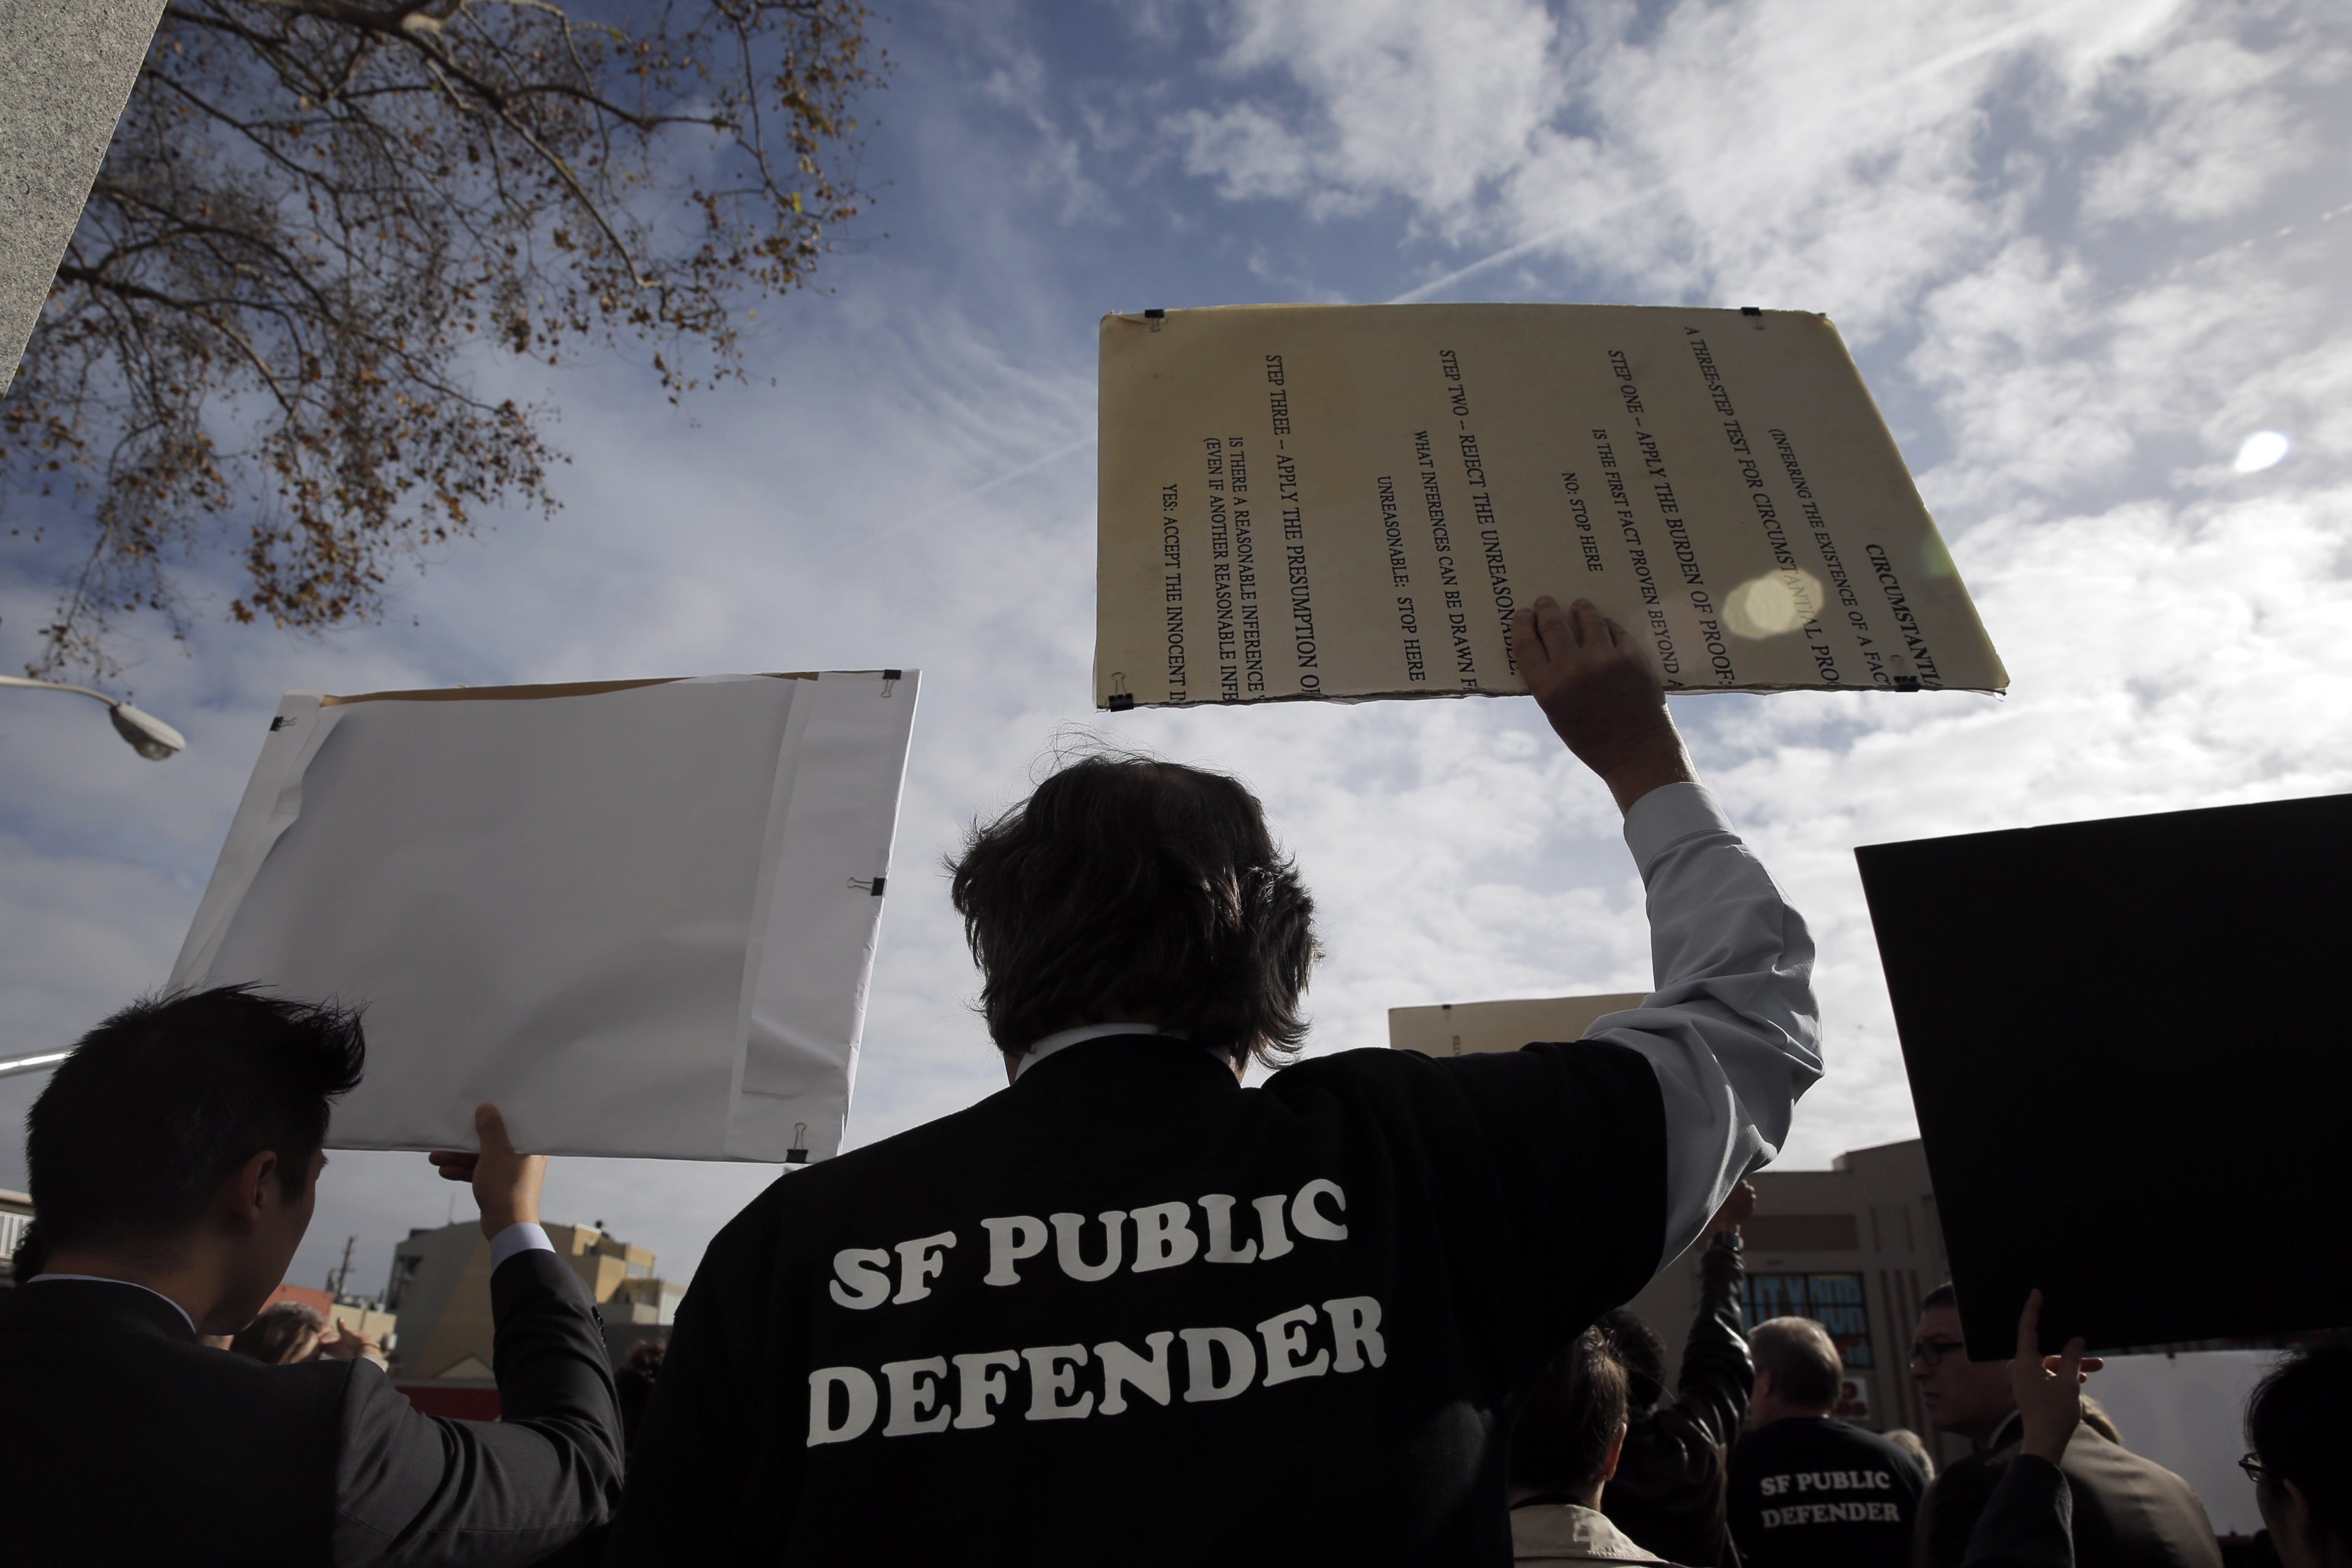 Person in a &quot;SF Public Defender&quot; jacket raises a sign at a protest under a cloudy sky.